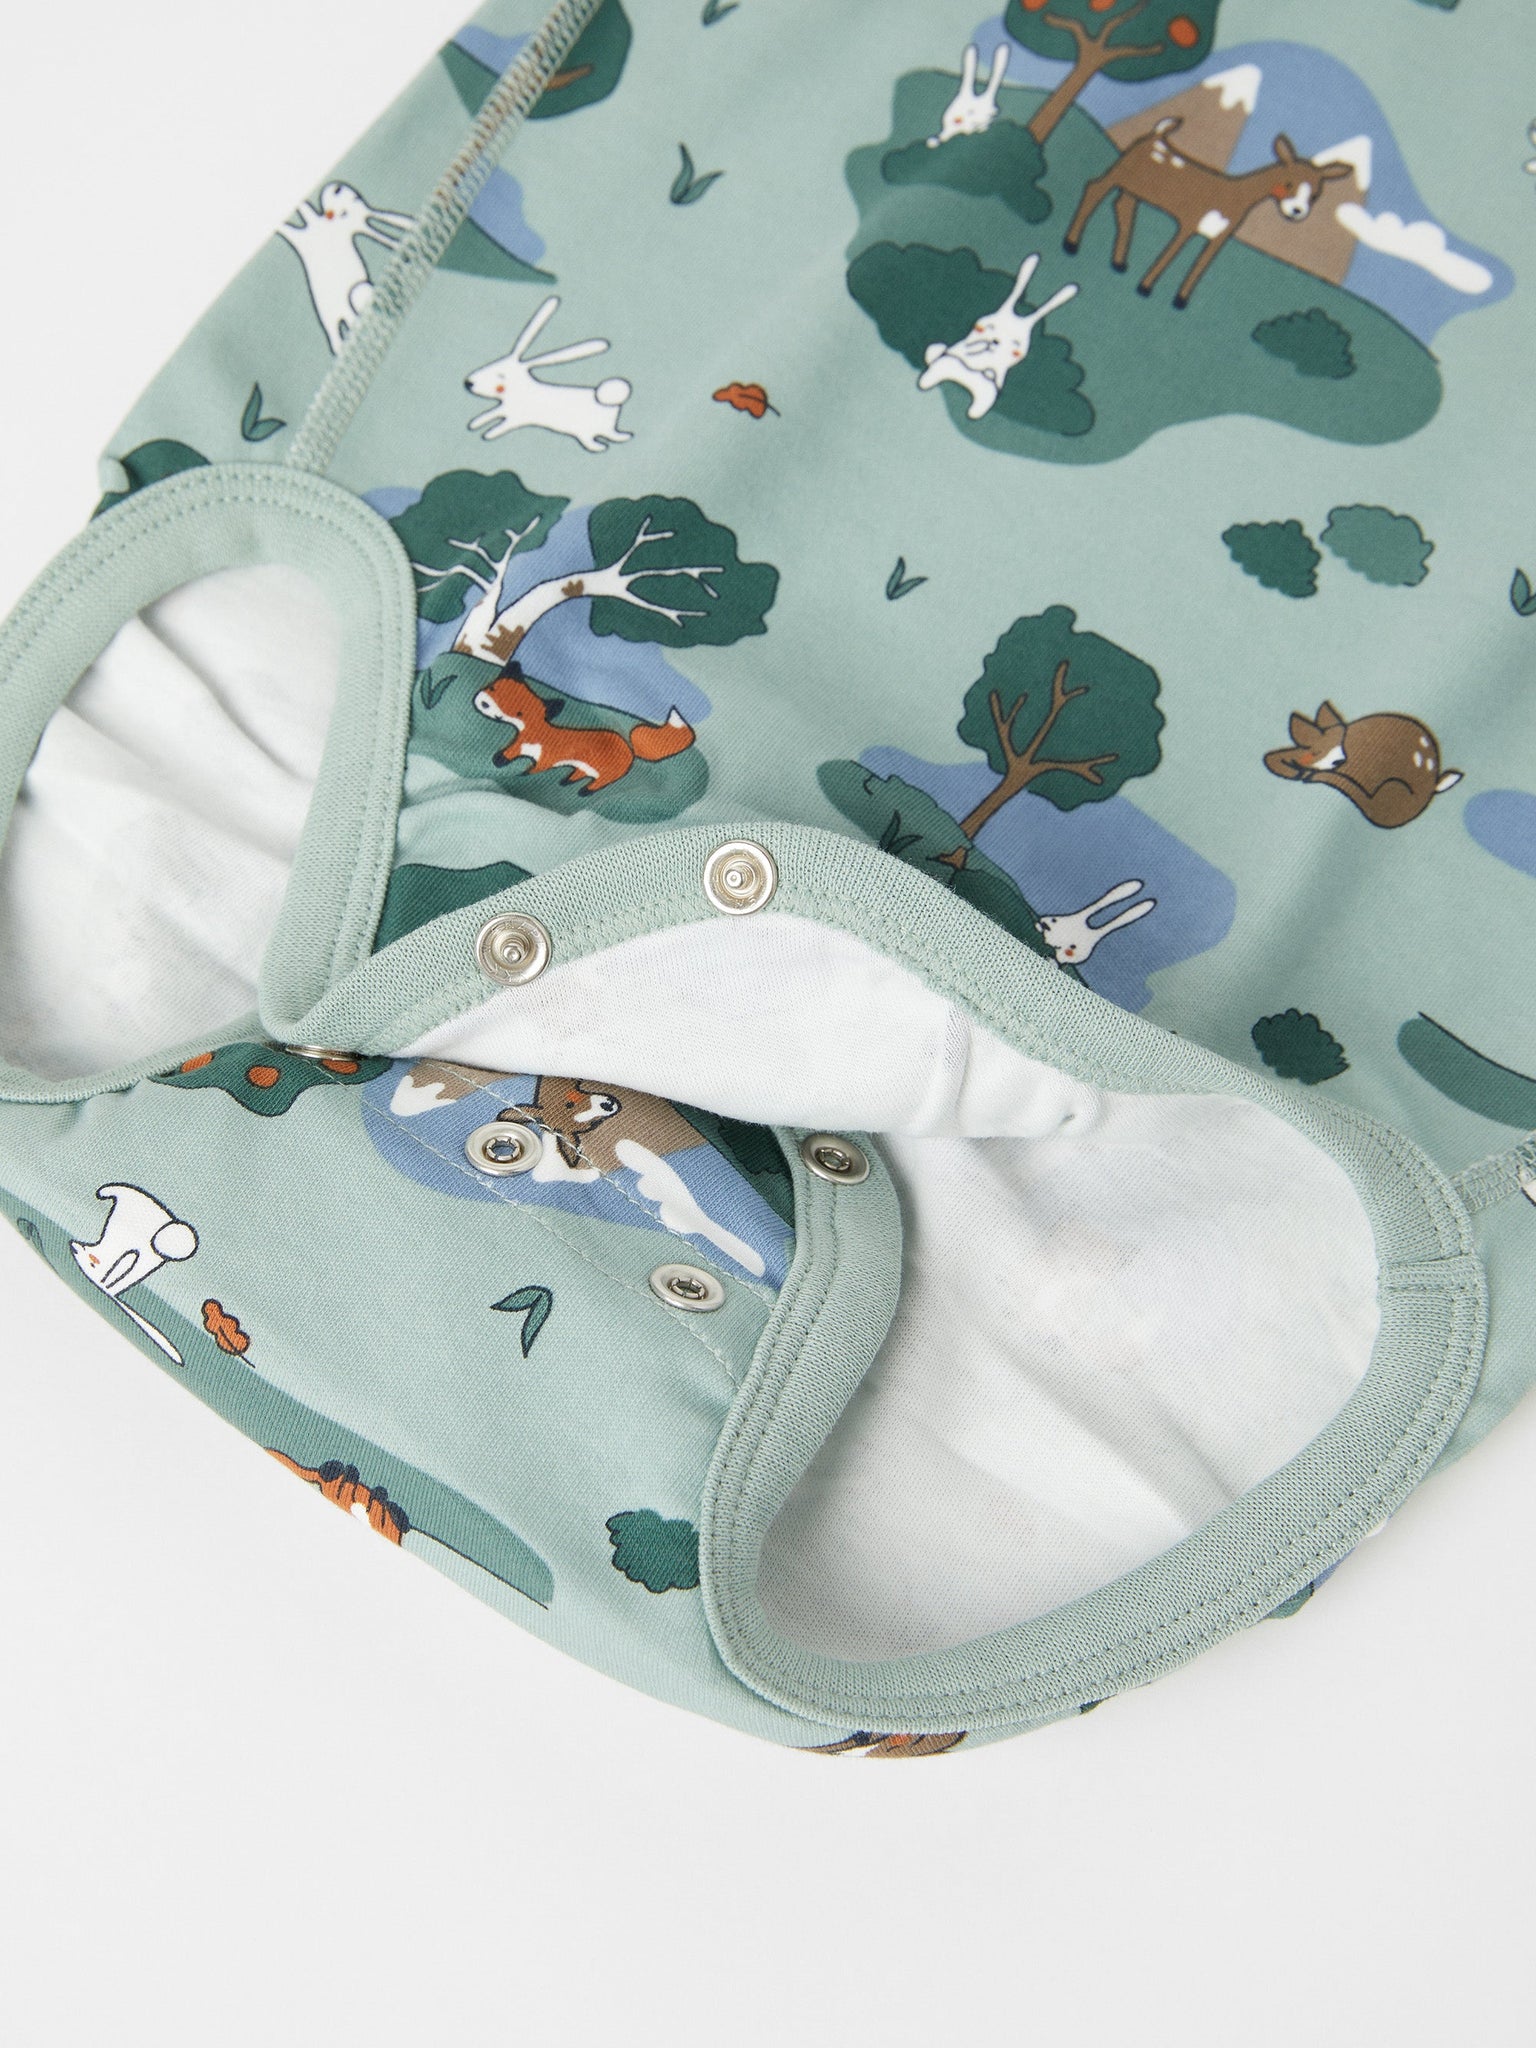 Green Organic Cotton Babygrow from the Polarn O. Pyret baby collection. Nordic baby clothes made from sustainable sources.